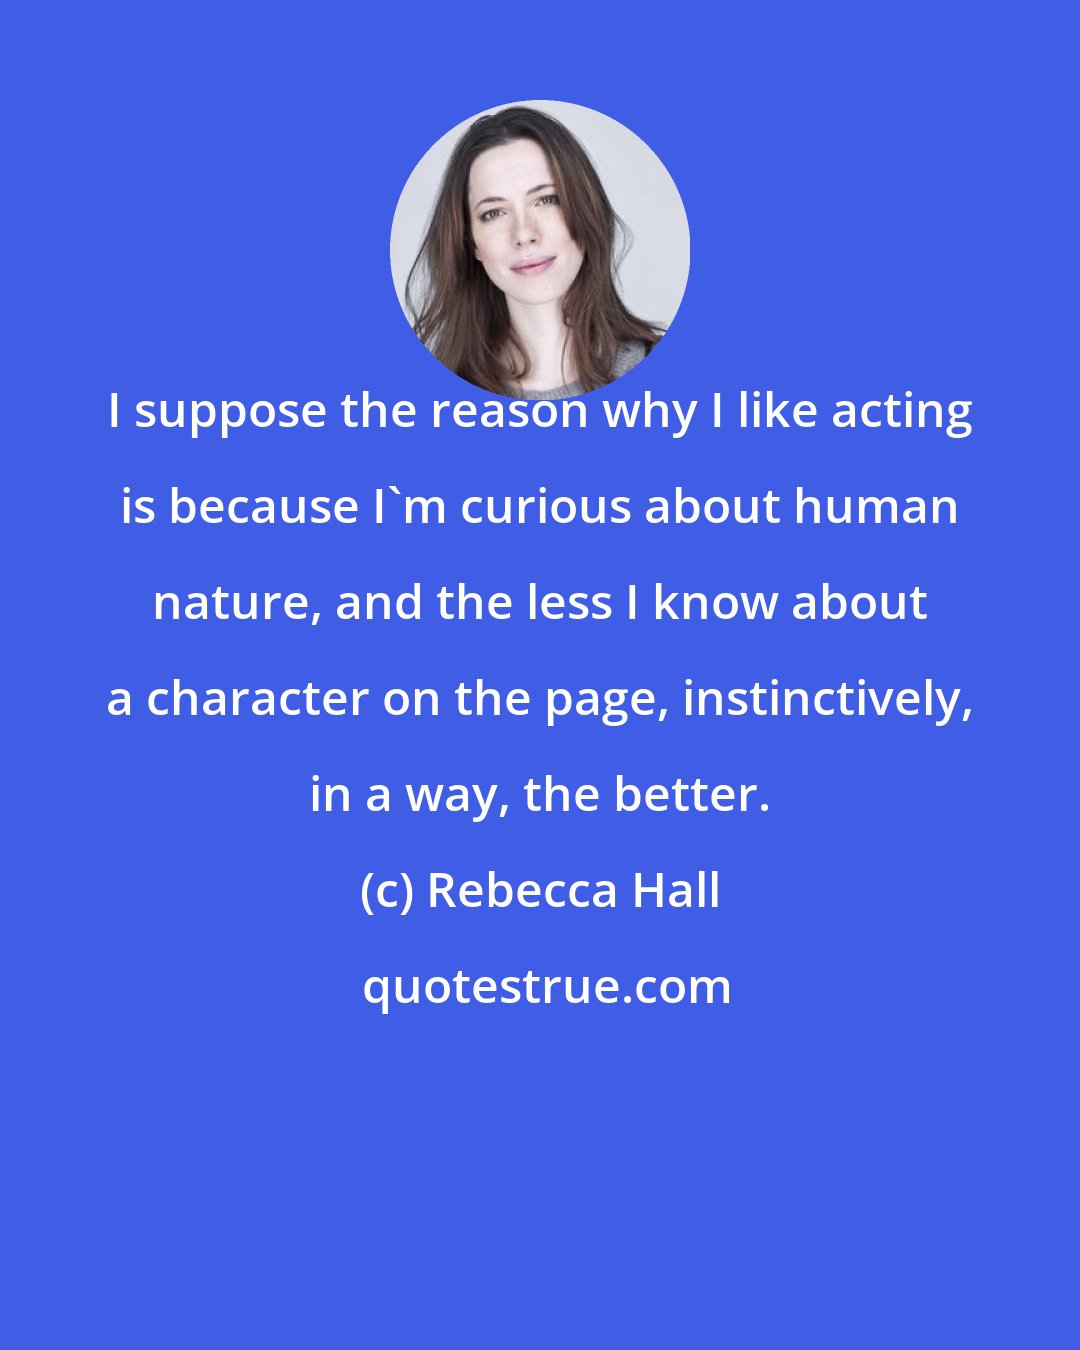 Rebecca Hall: I suppose the reason why I like acting is because I'm curious about human nature, and the less I know about a character on the page, instinctively, in a way, the better.